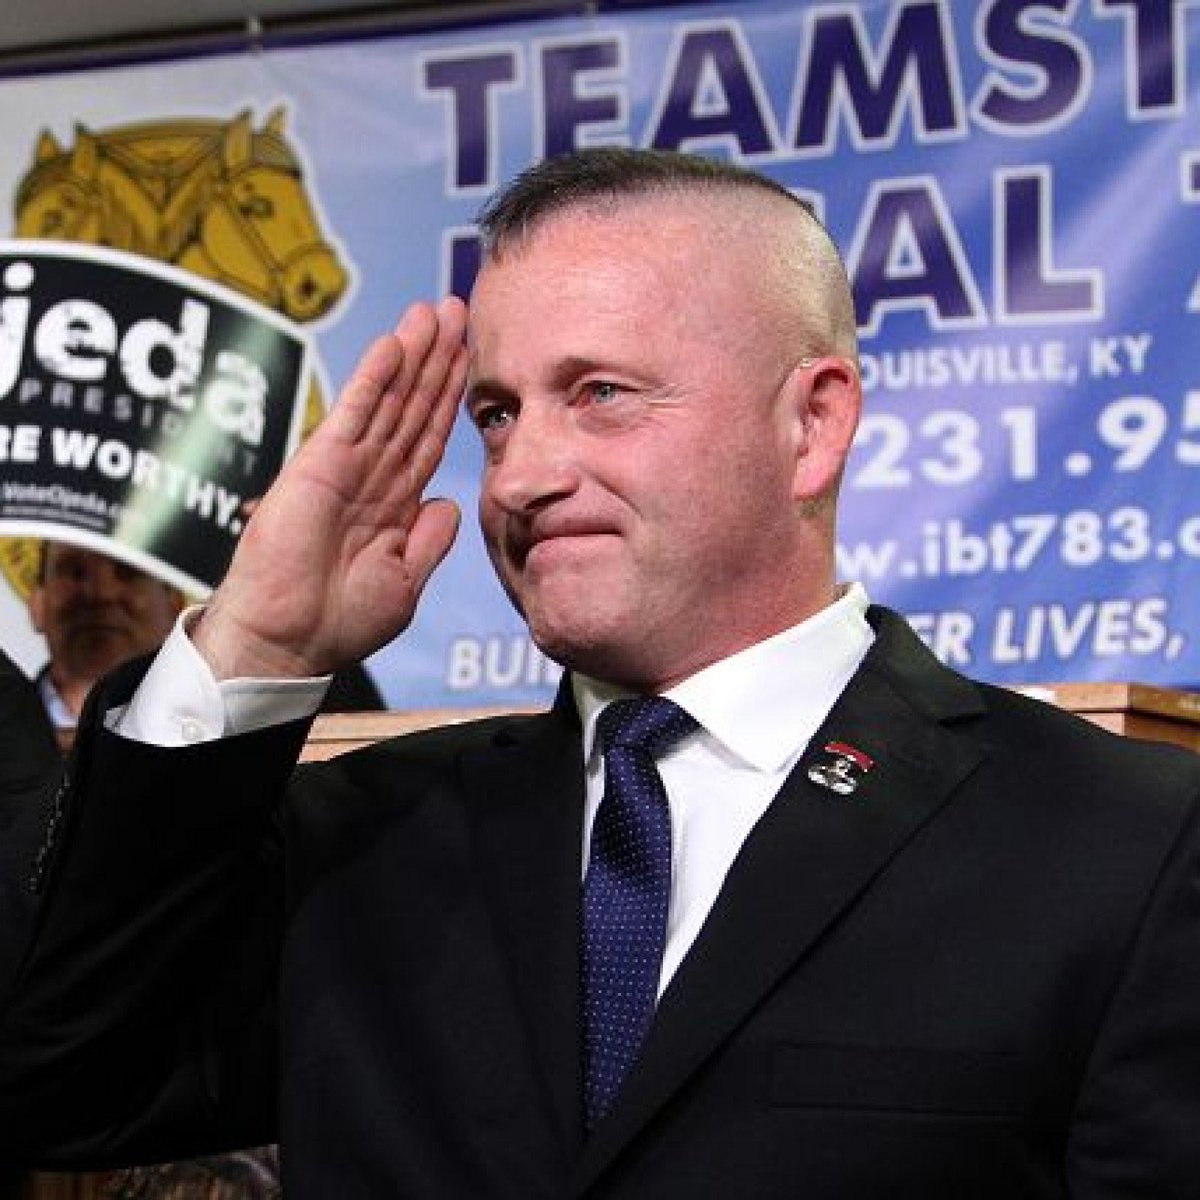  boom richard ojeda, military veteran and former west virginia state senator; dropped out january 25th, 2019